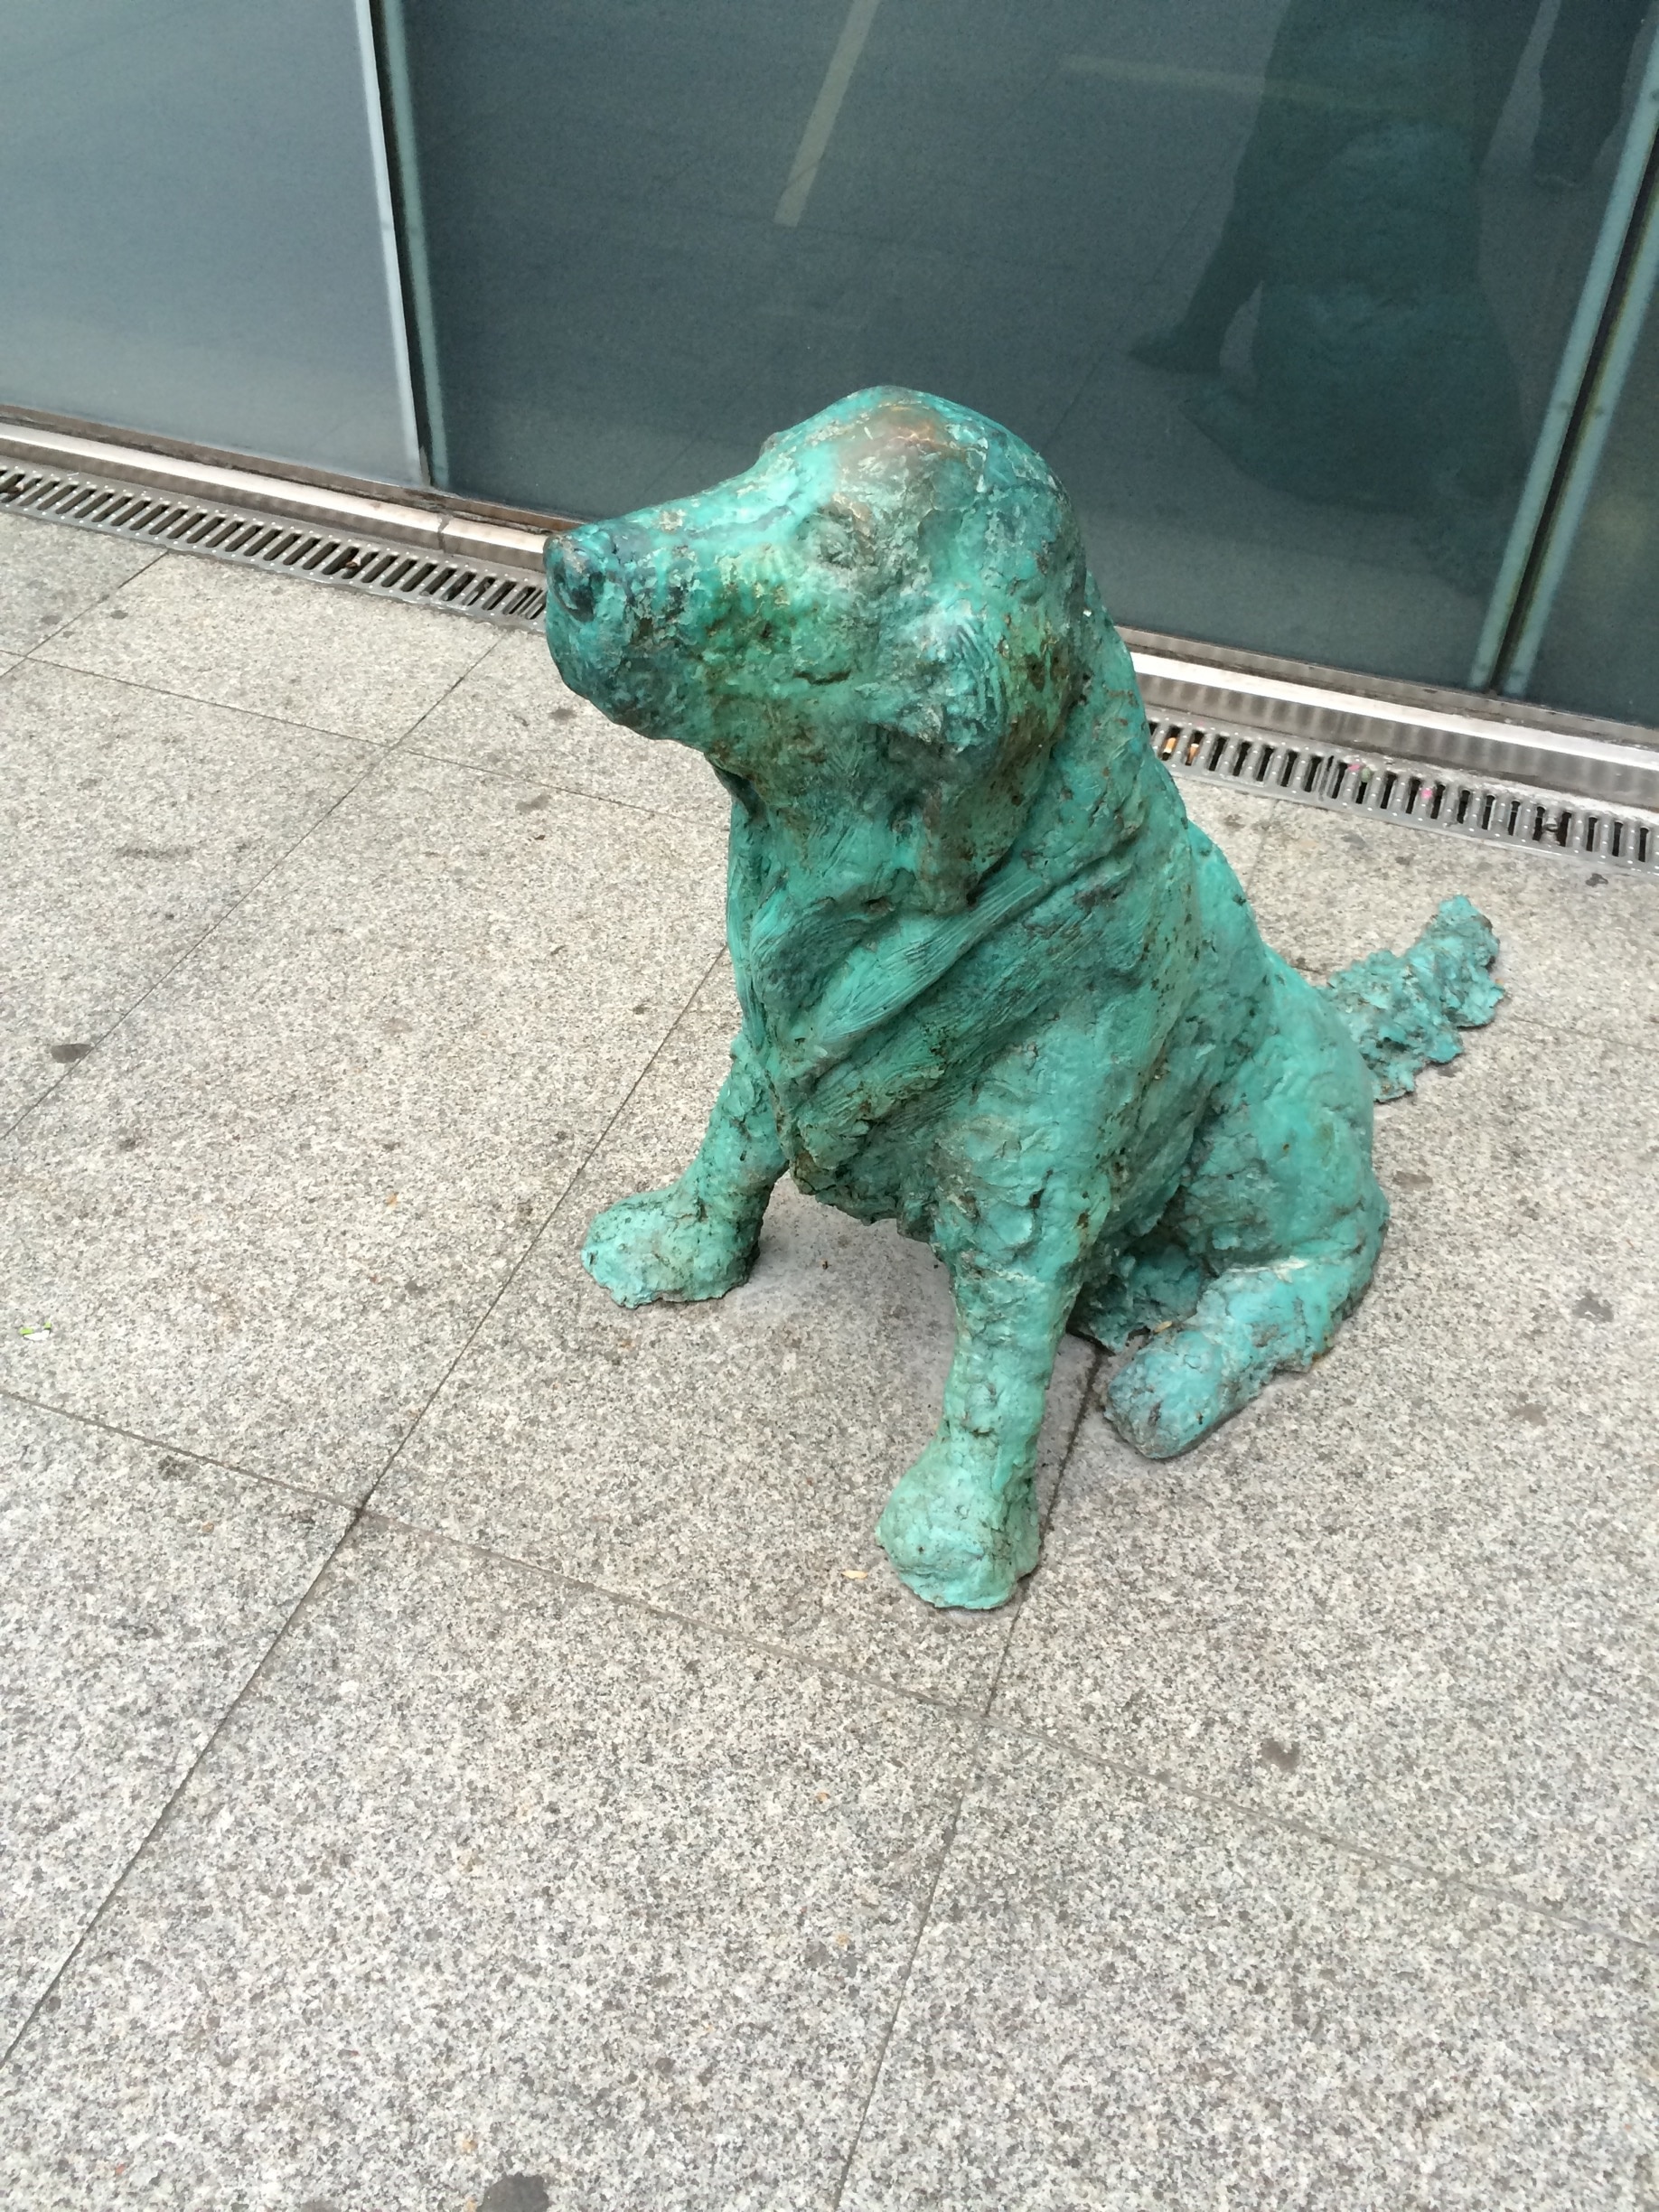 Ney was a much loved local dog. He died earlier this year and this statue was donated to the city.